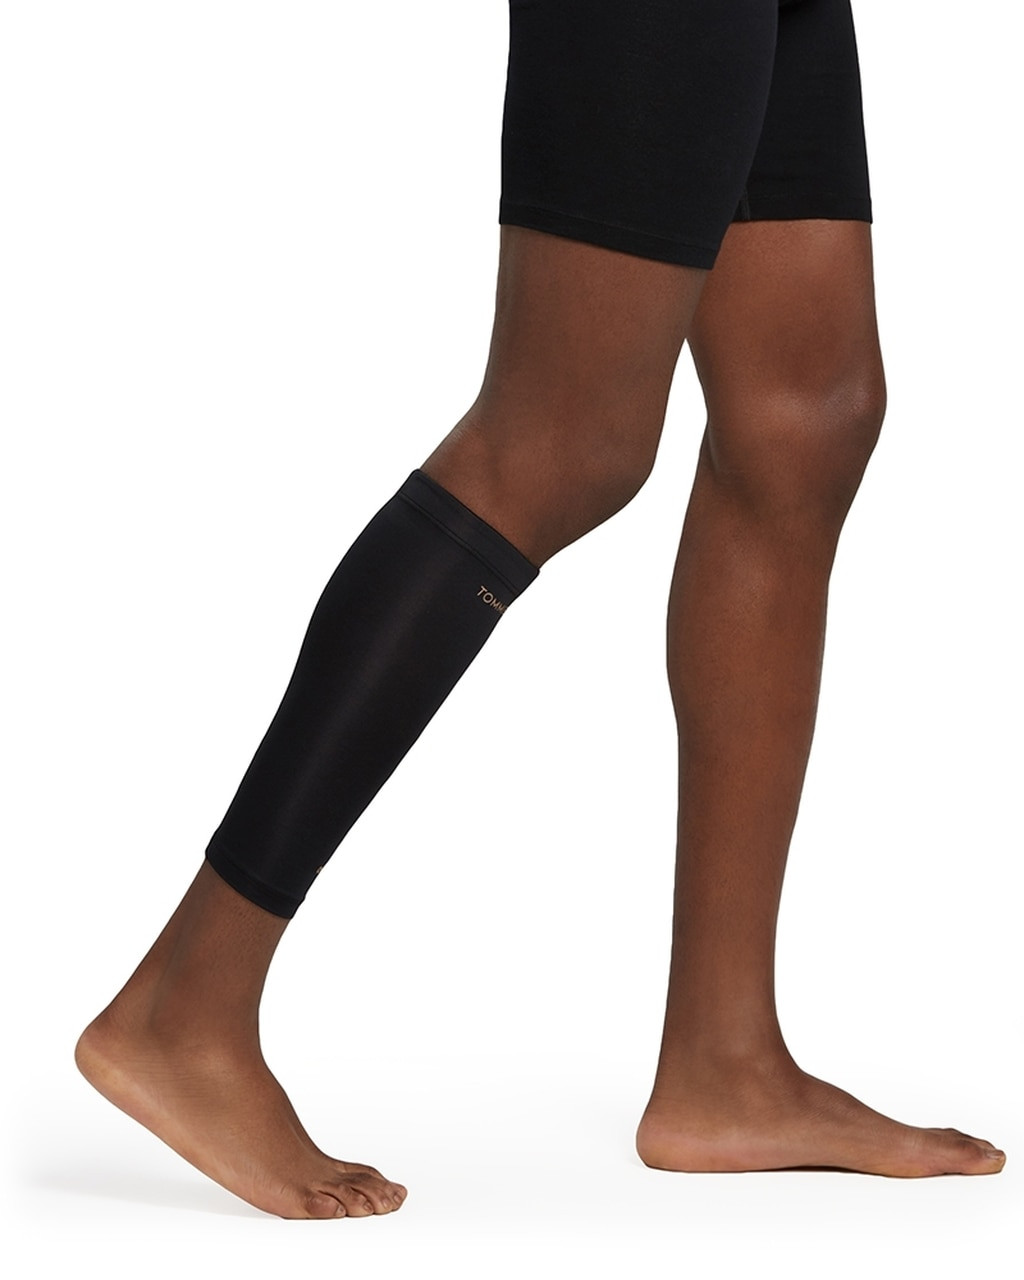 Calf Muscle Brace, Trusted Compression